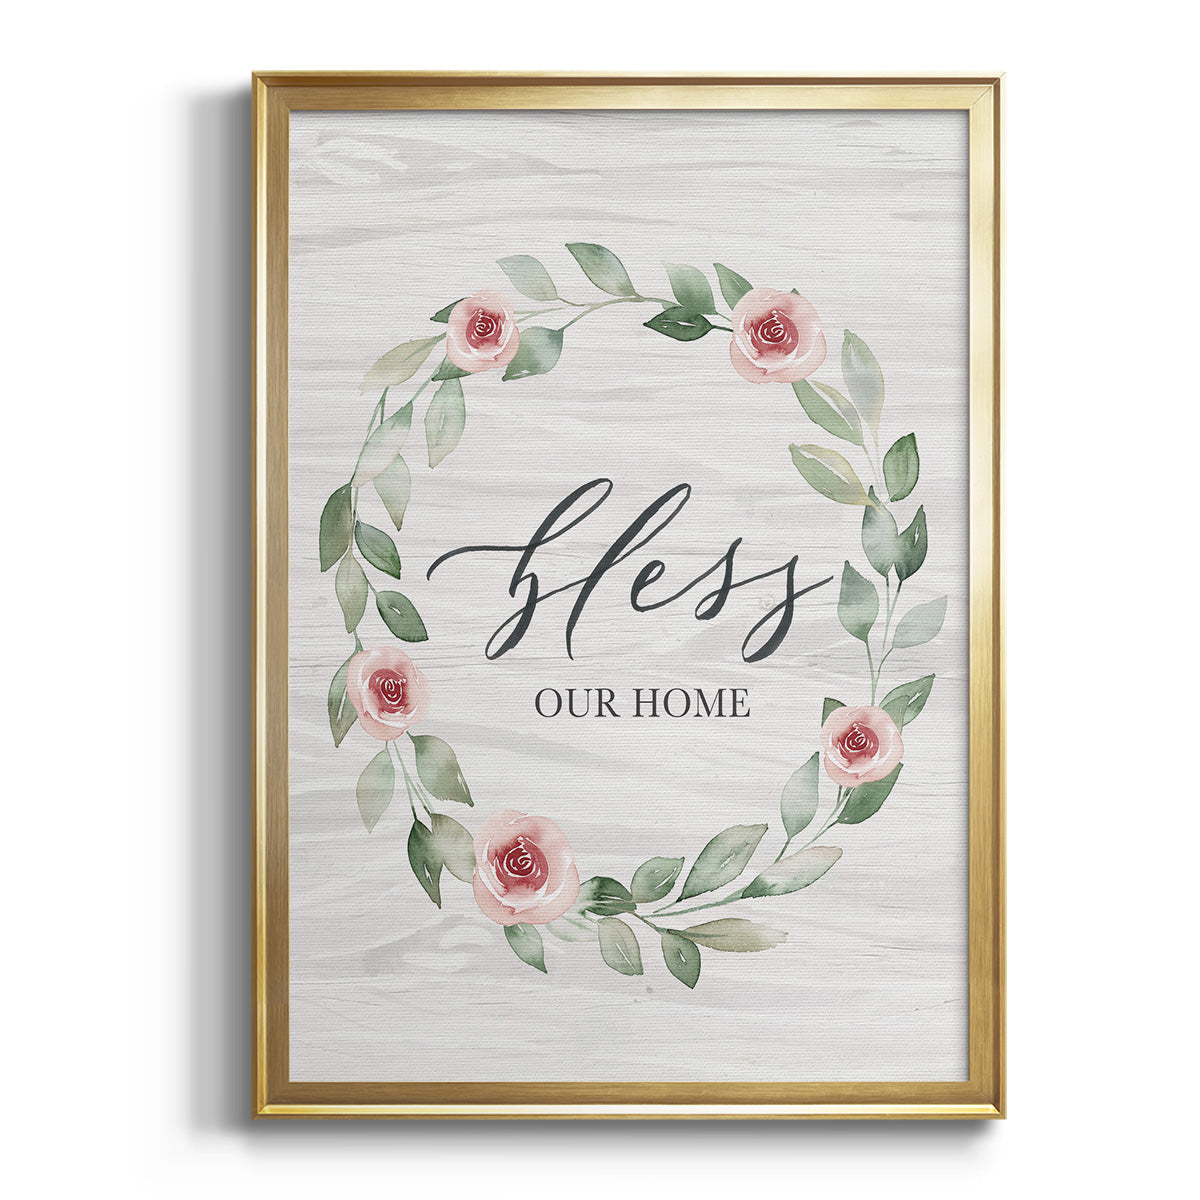 Bless Our Home Premium Framed Print - Ready to Hang